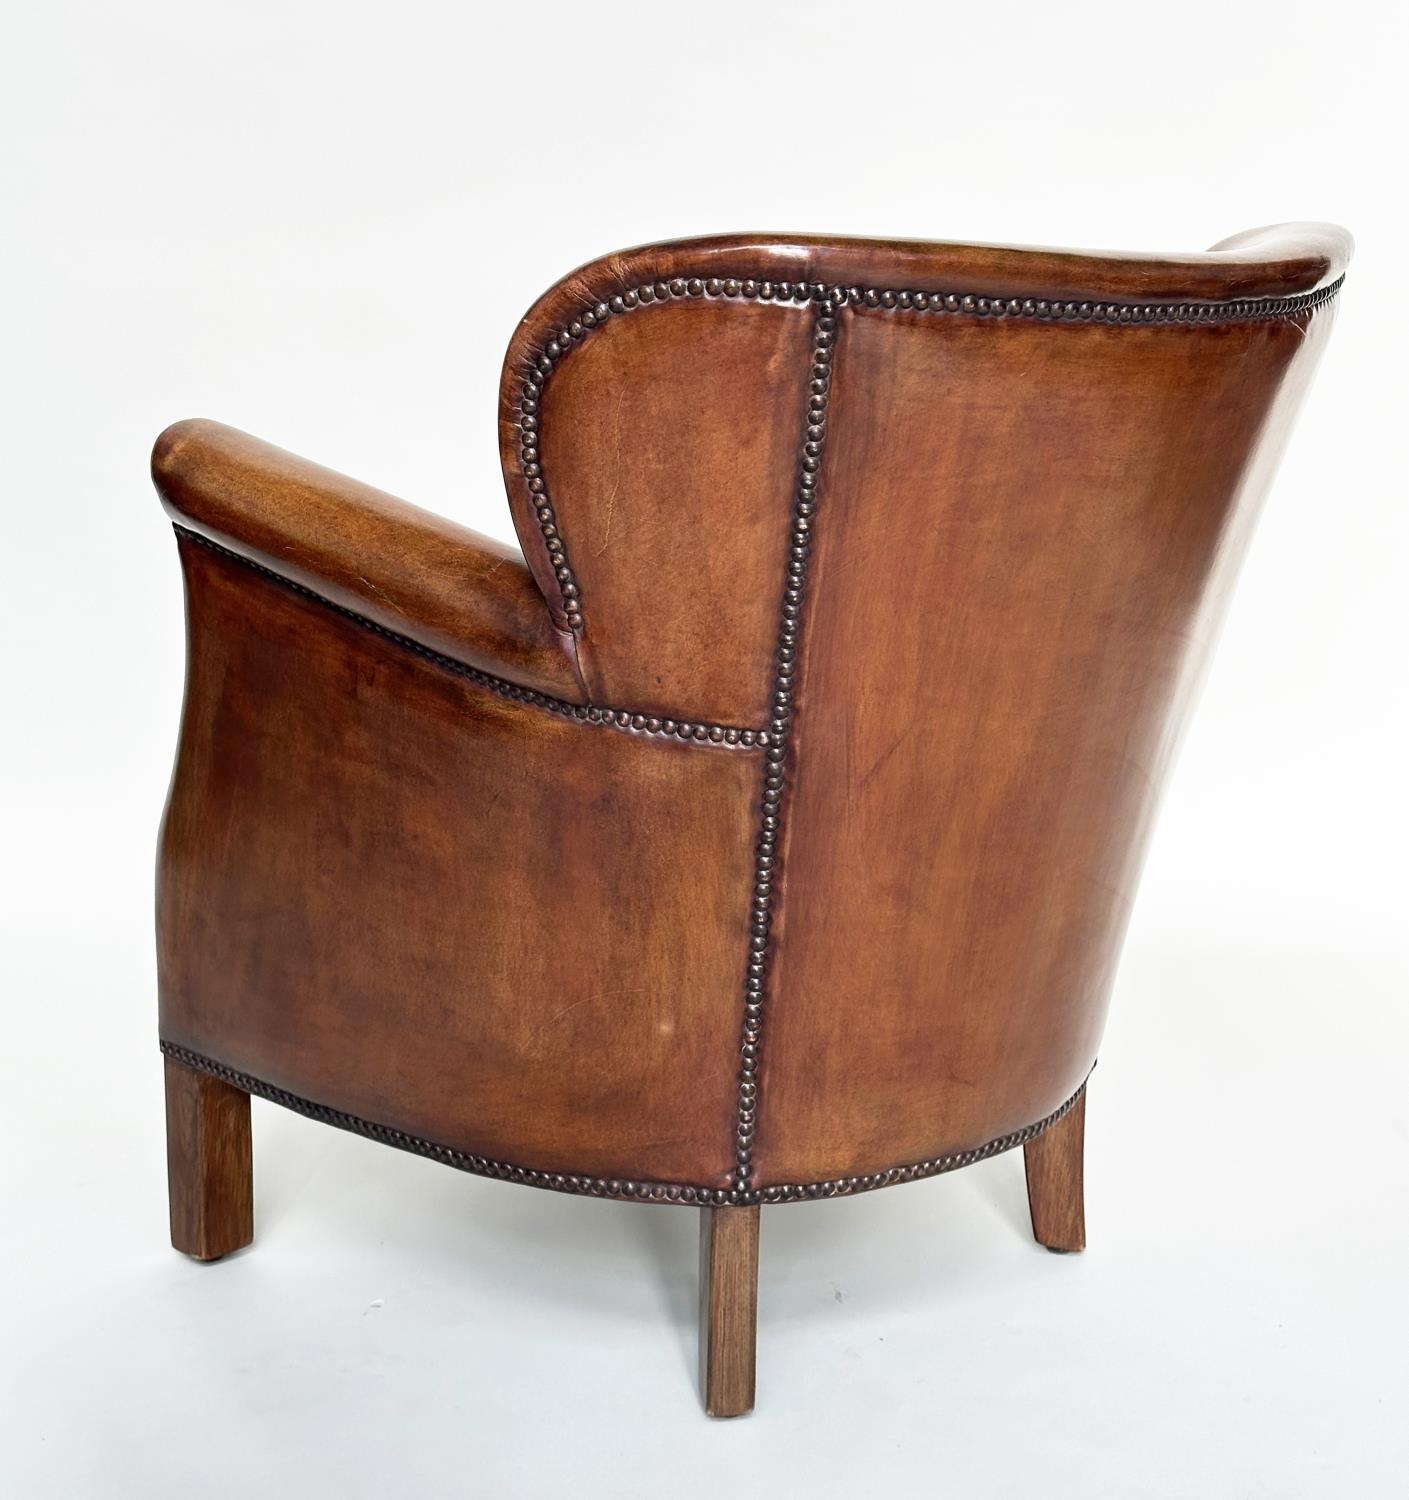 LITTLE PROFESSOR ARMCHAIR, in the manner of Timothy Oulton soft natural mid brown leather upholstery - Image 5 of 9